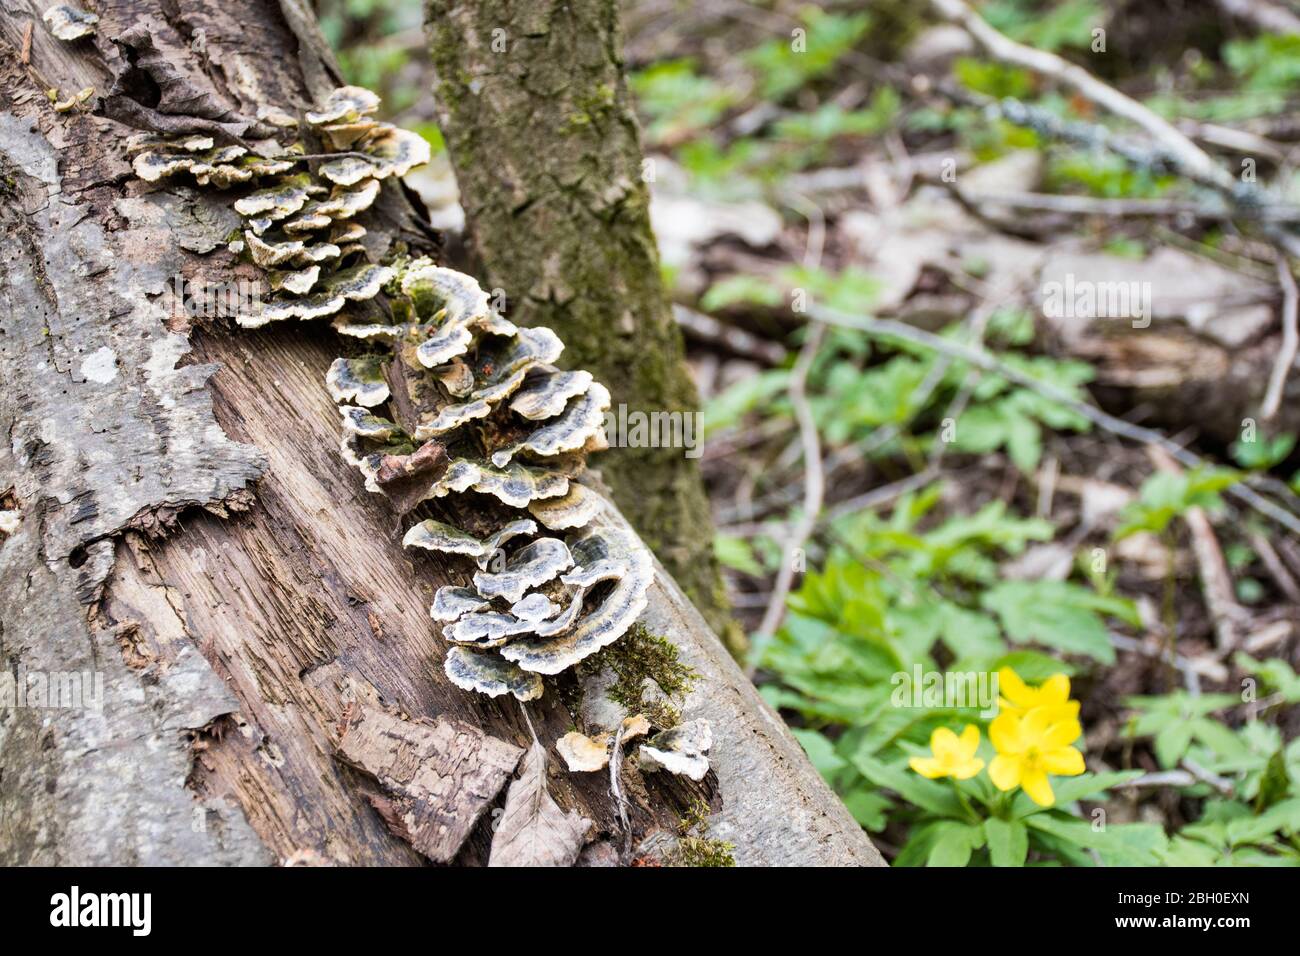 Mushrooms on a trunk in a mossy forest. Smoky polypore or smoky bracket, species of fungus, plant pathogen that causes white rot in live trees Stock Photo